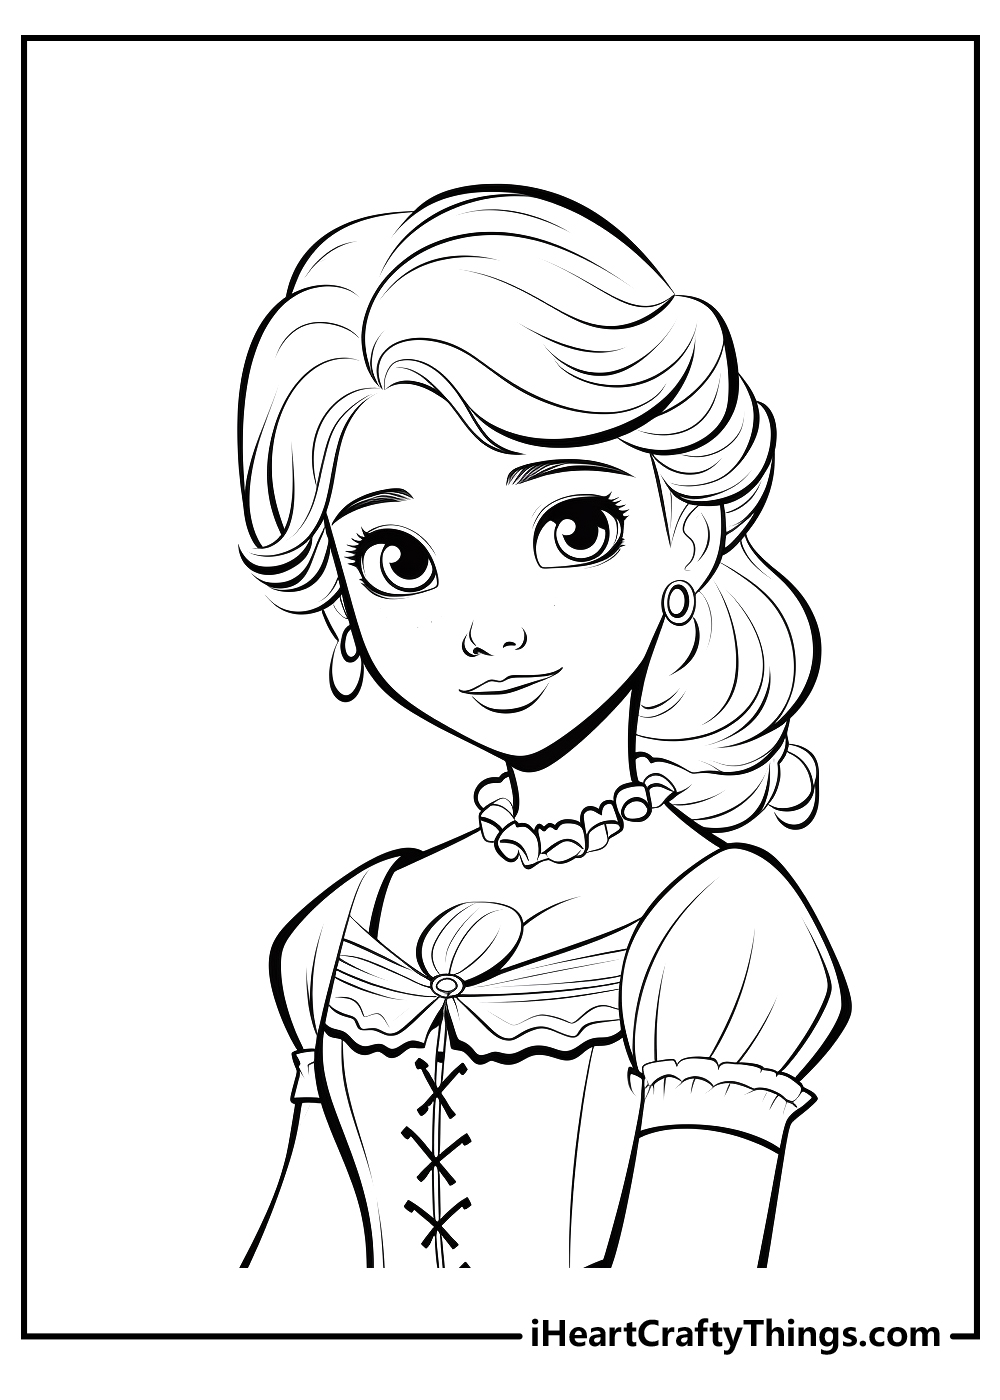 Anna coloring pages free printables